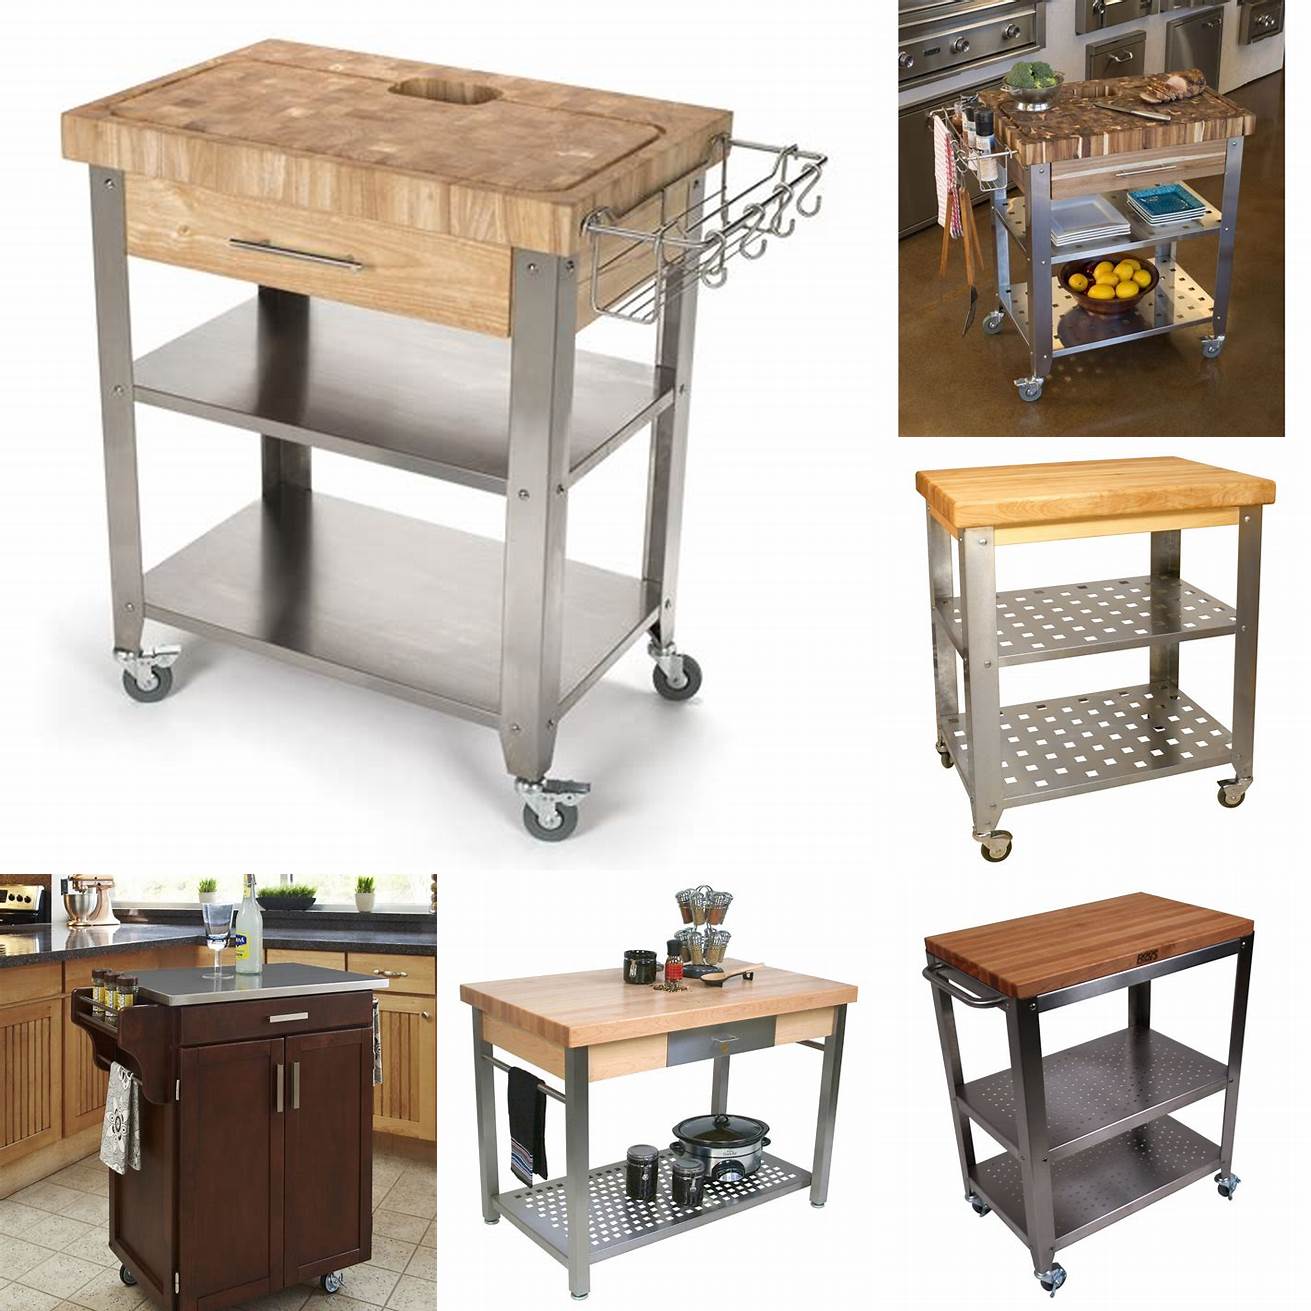 A stainless steel kitchen cart with a butcher block top